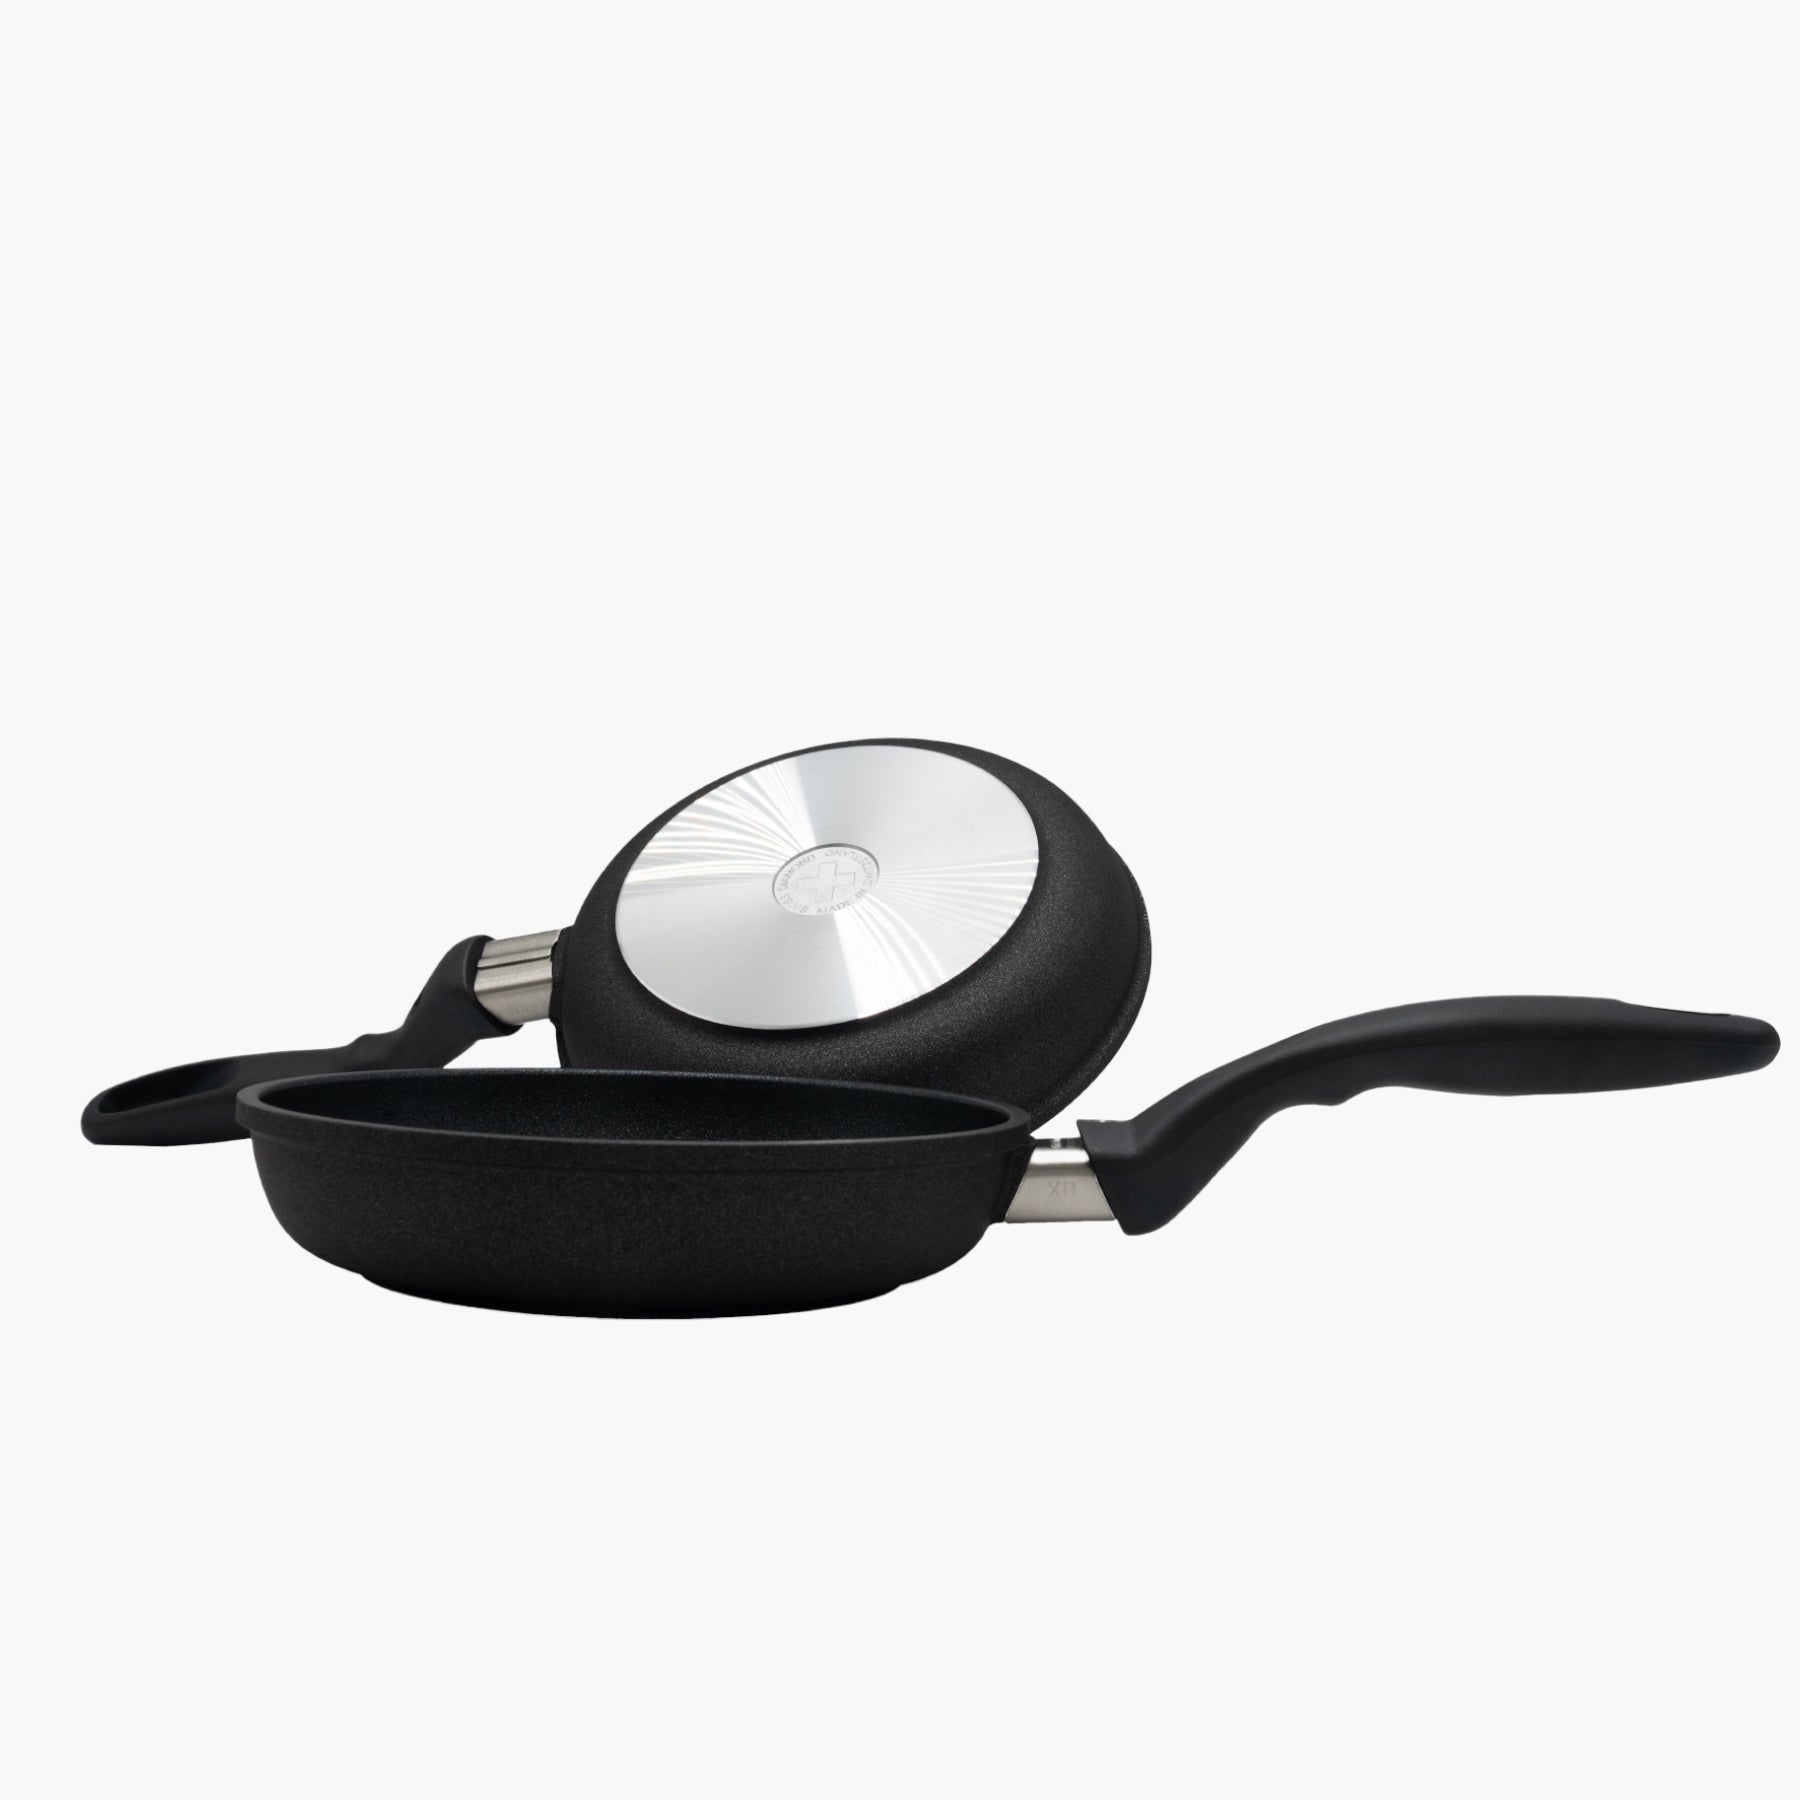 XD Nonstick 2-Piece 8" Fry Pan Set side and bottom view